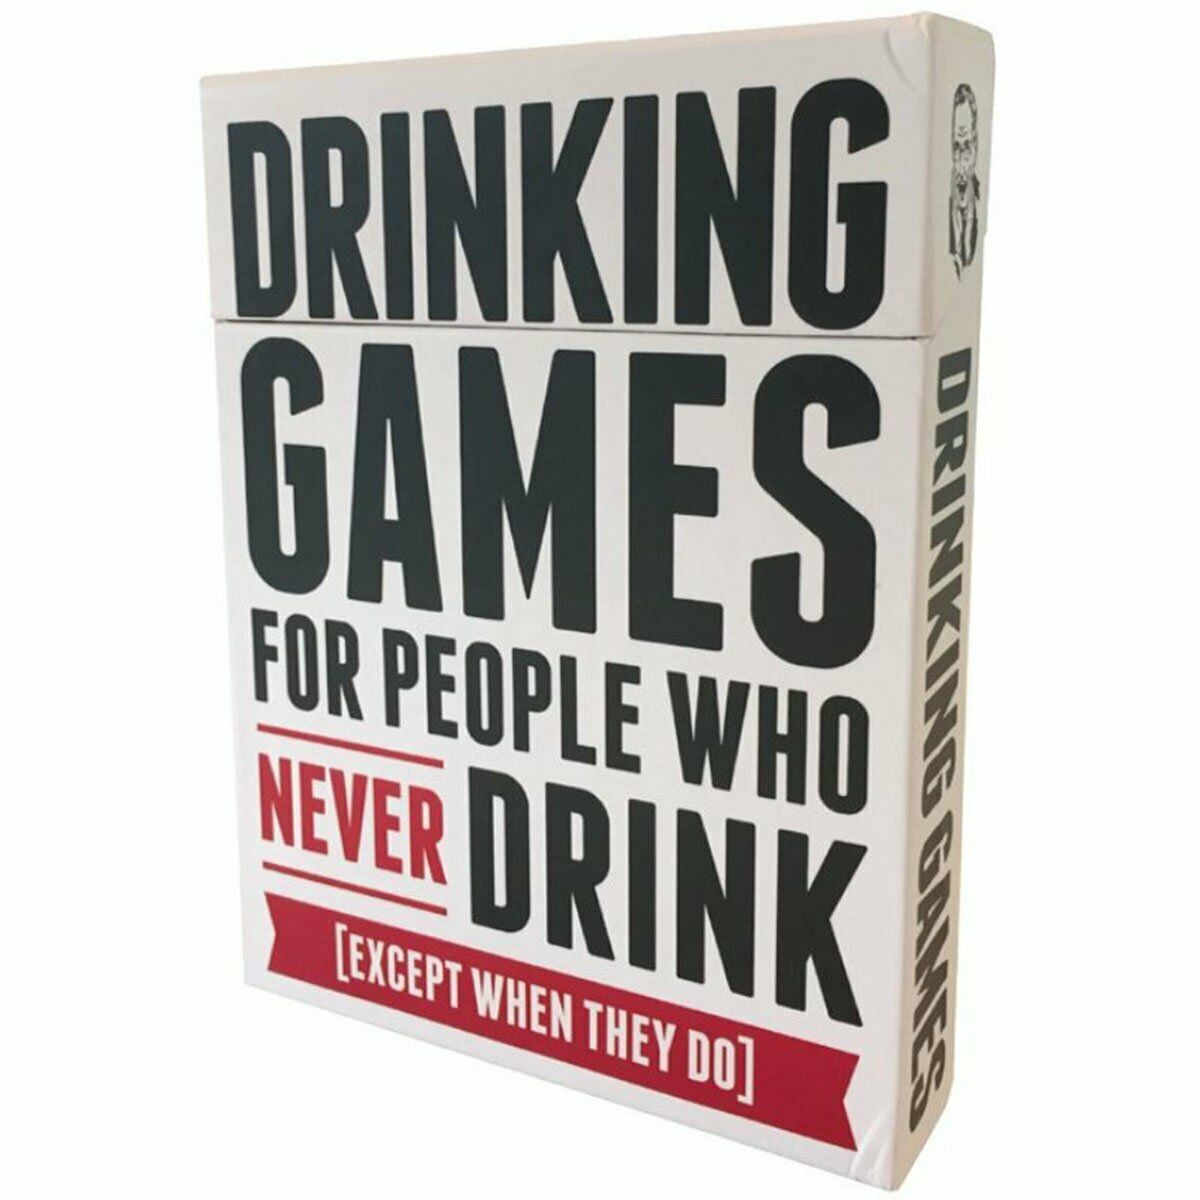 Drinking Games for people who never drink